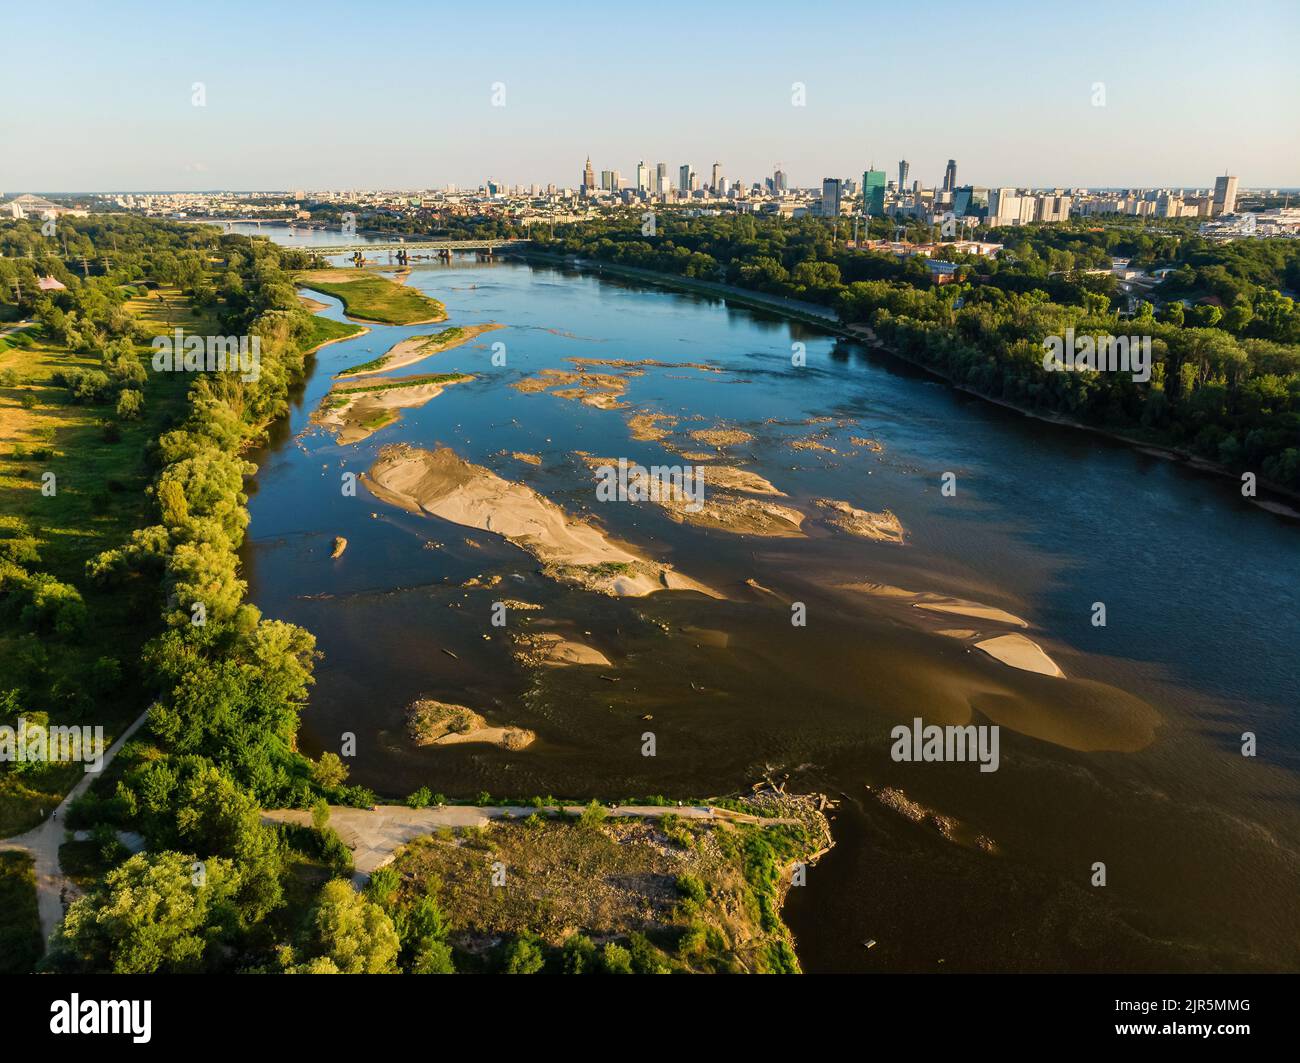 Low water level in Vistula river, effect of drought seen from the bird's eye perspective. City Warsaw in a distance. Stock Photo